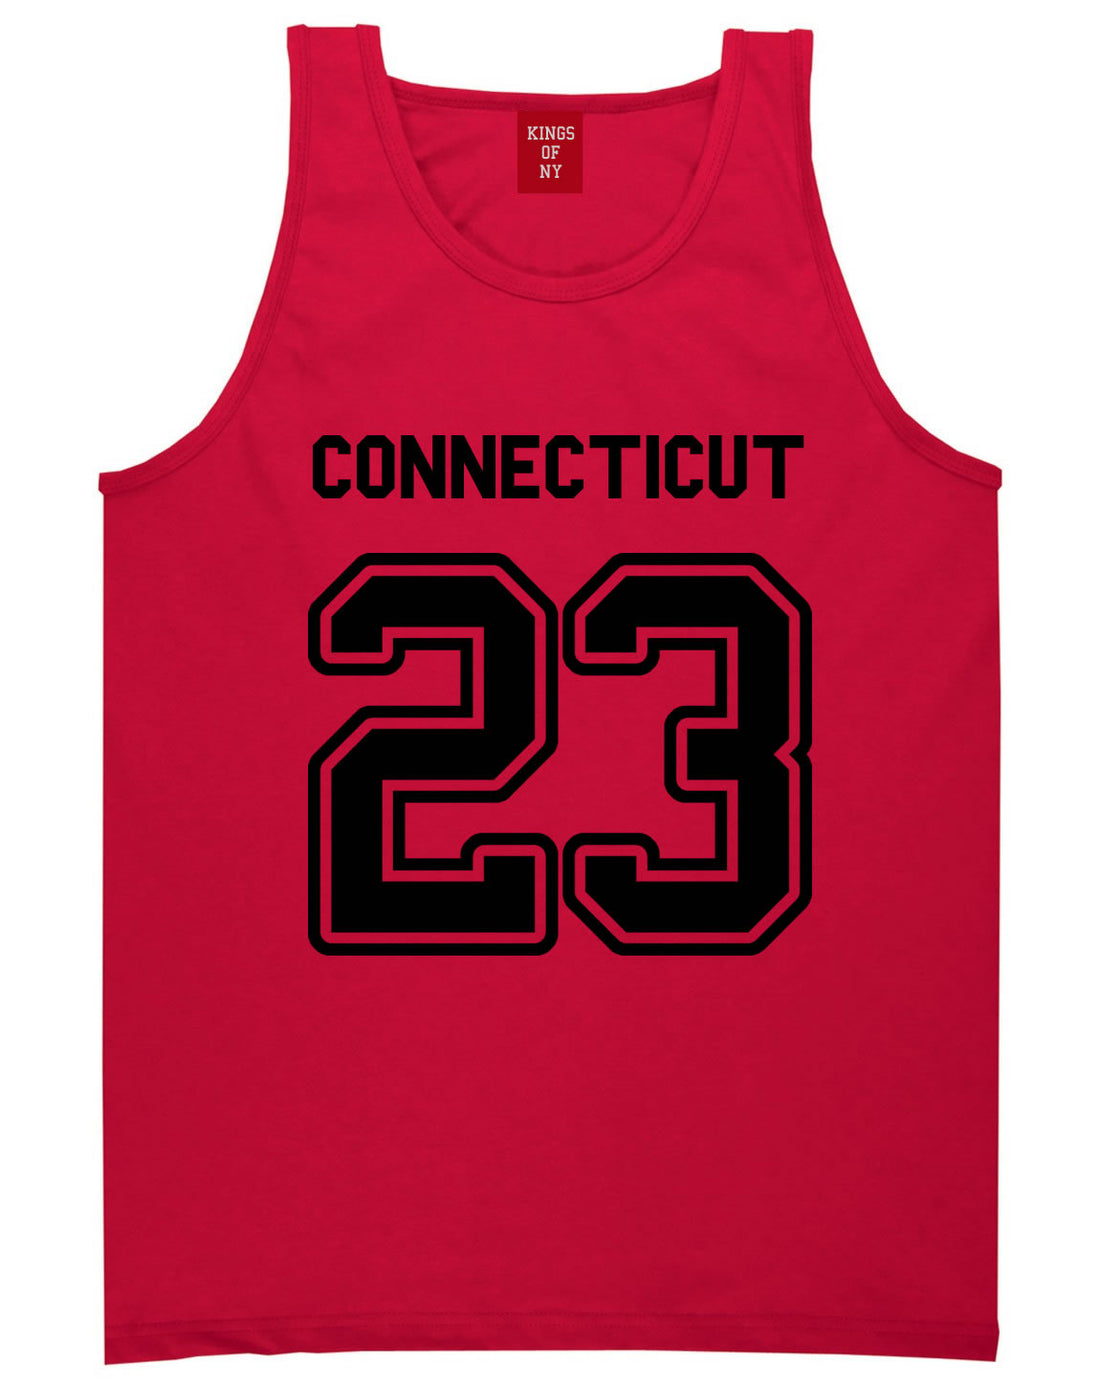 Sport Style Connecticut 23 Team State Jersey Mens Tank Top By Kings Of NY